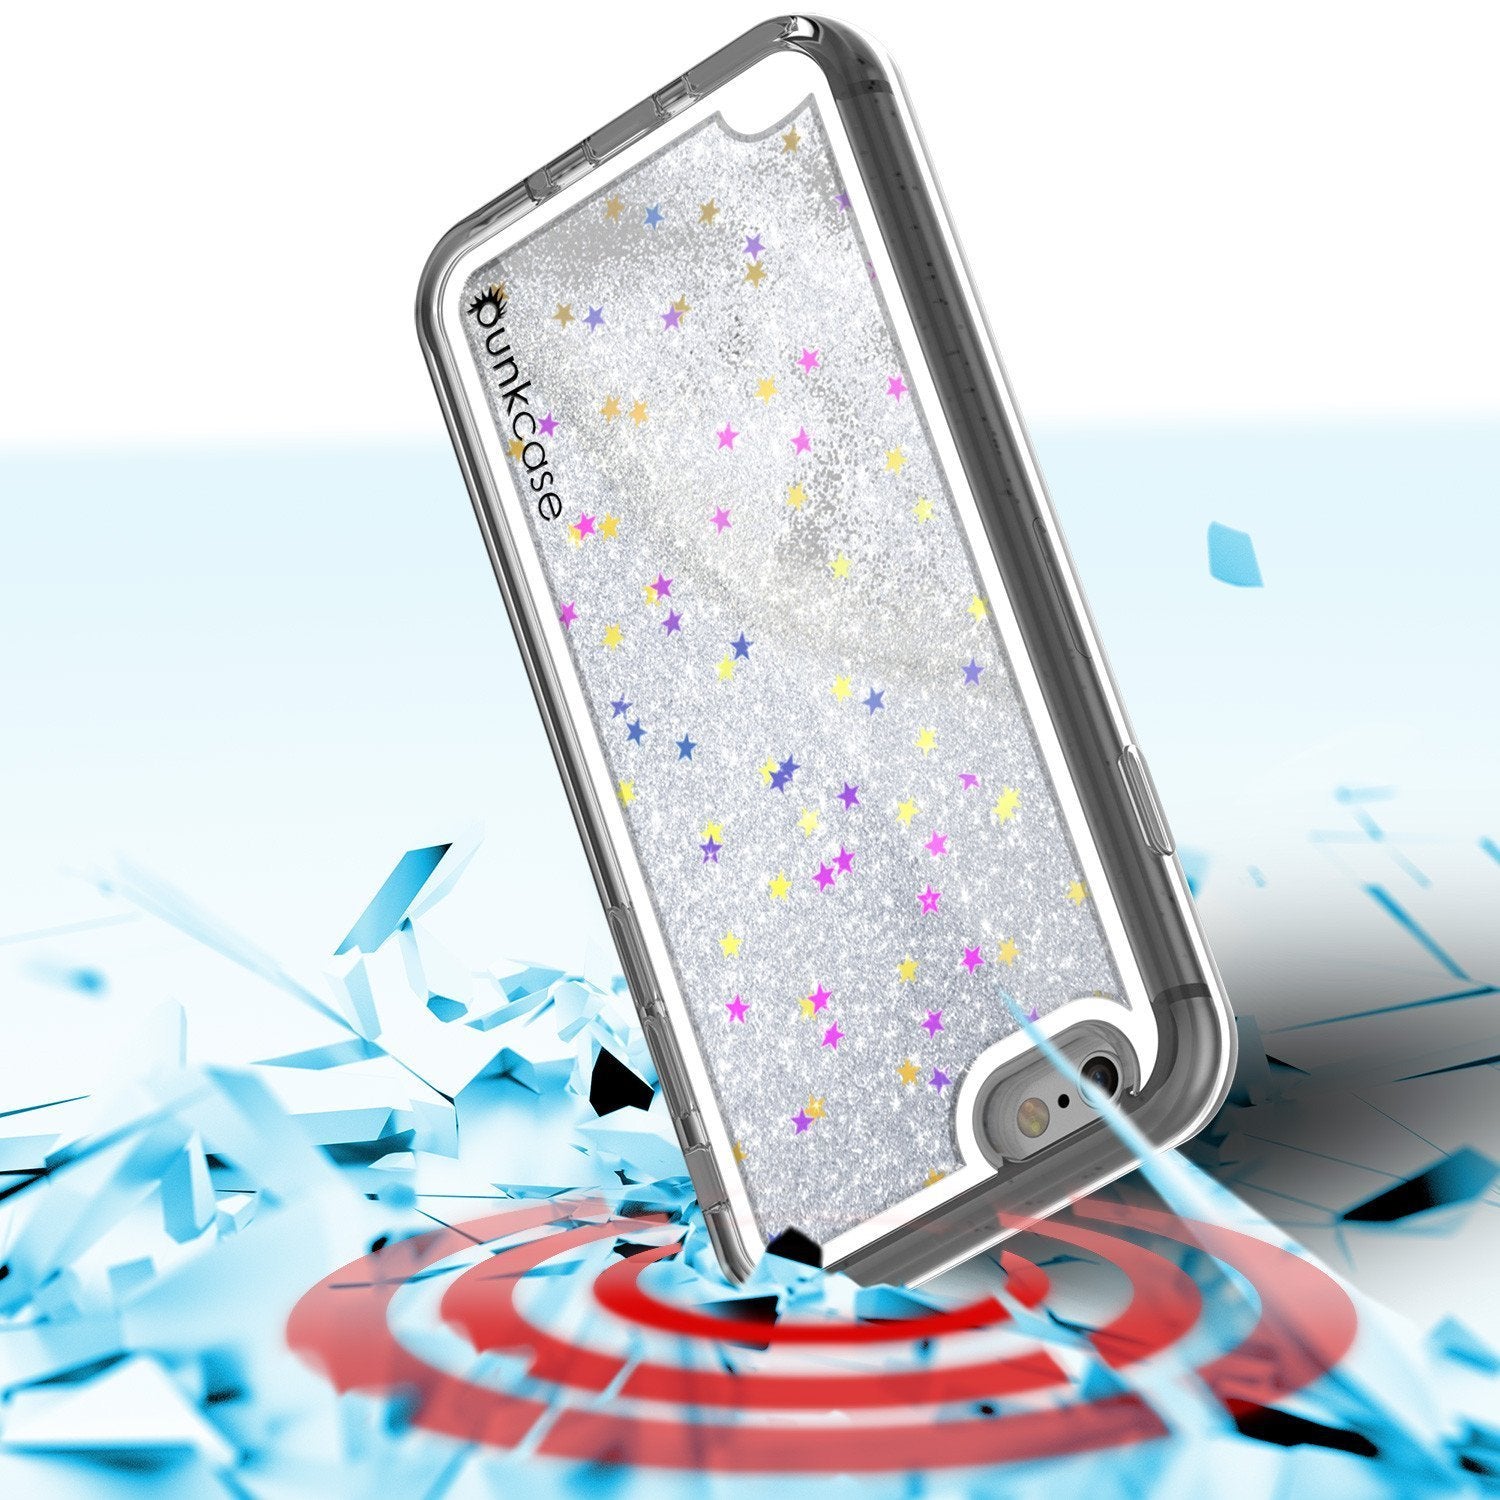 iPhone SE (4.7") Case, PunkCase LIQUID Silver Series, Protective Dual Layer Floating Glitter Cover